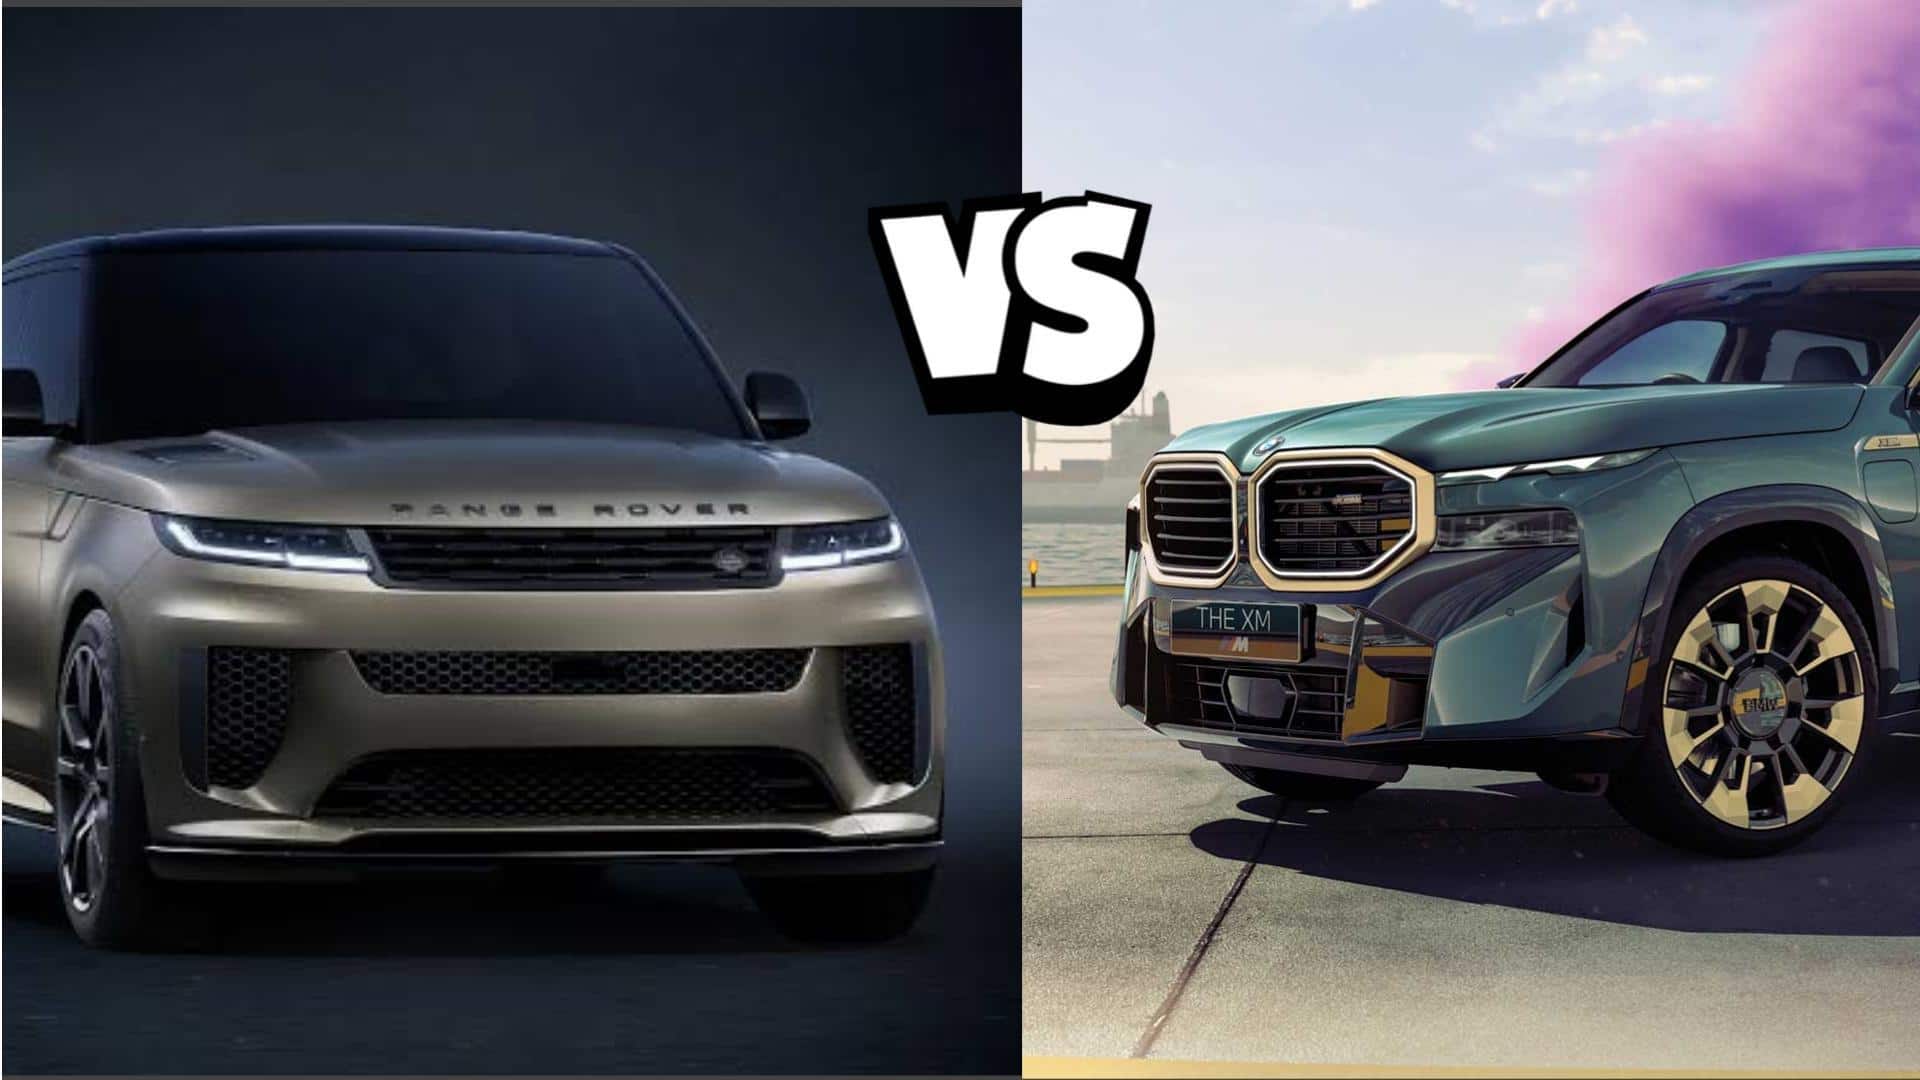 Range Rover SV vs BMW XM: Which SUV is better